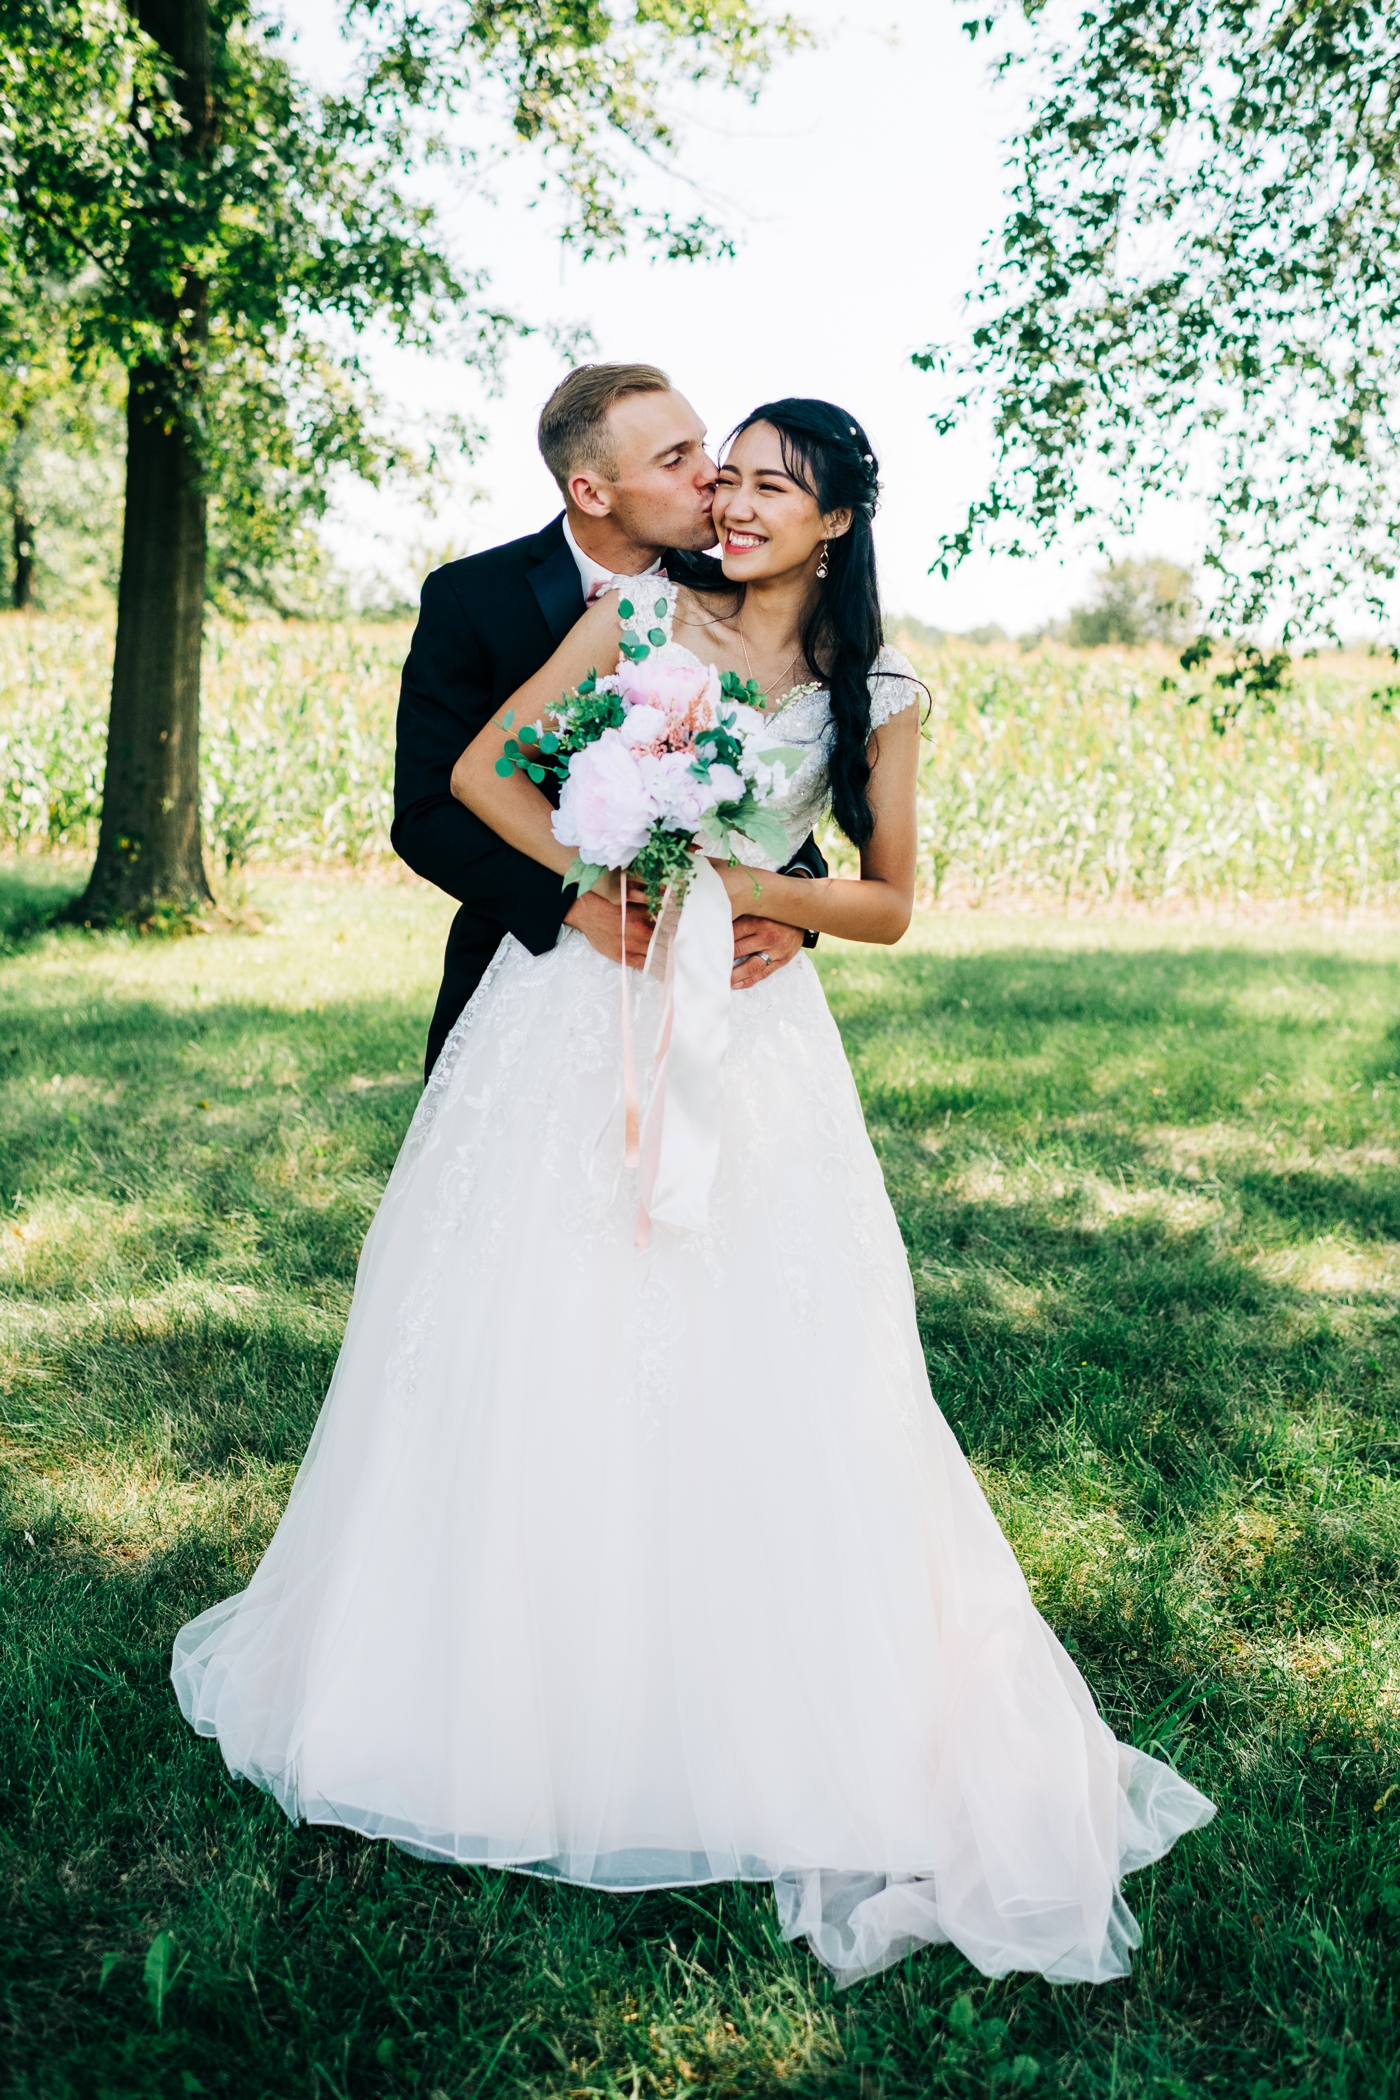 Bride in a lace beaded ballgown from David’s Bridal